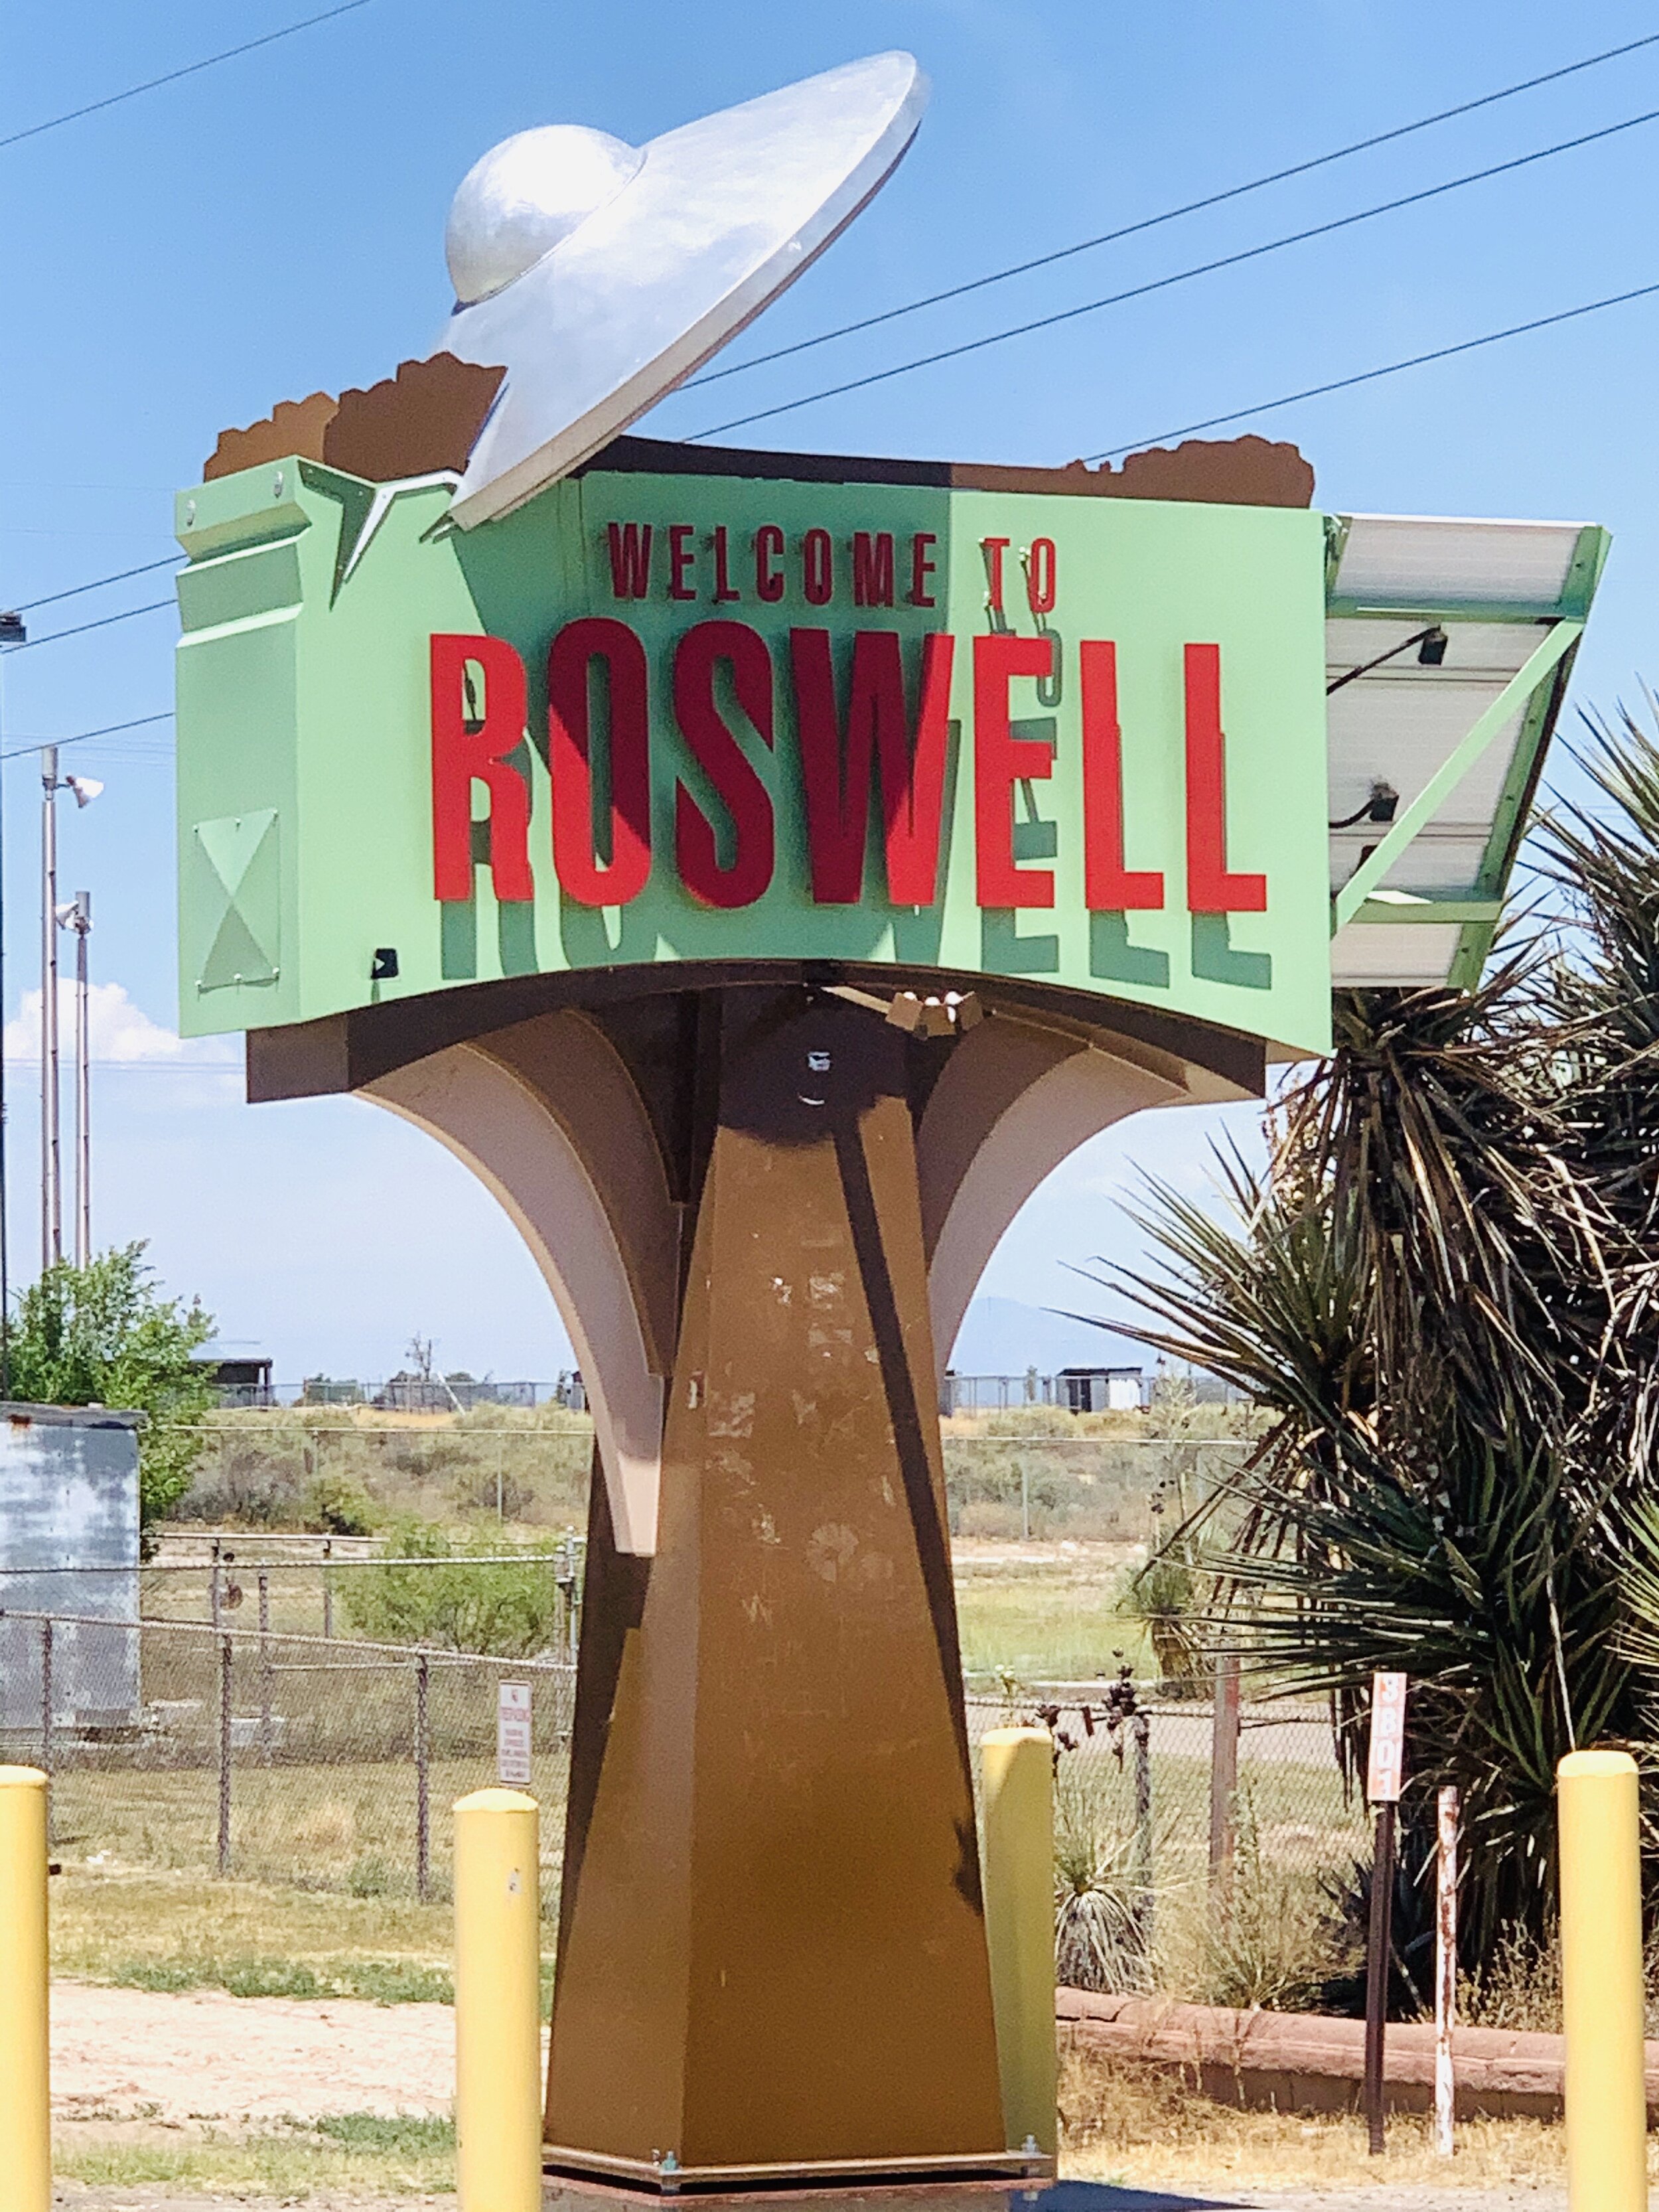  In the event you didn’t know, the town of Roswell, New Mexico, has an alien theme throughout because many believe this town has had UFO and alien activity in the past.      Here’s the story:   In 1947 there was a crash in a rancher’s field near Rosw